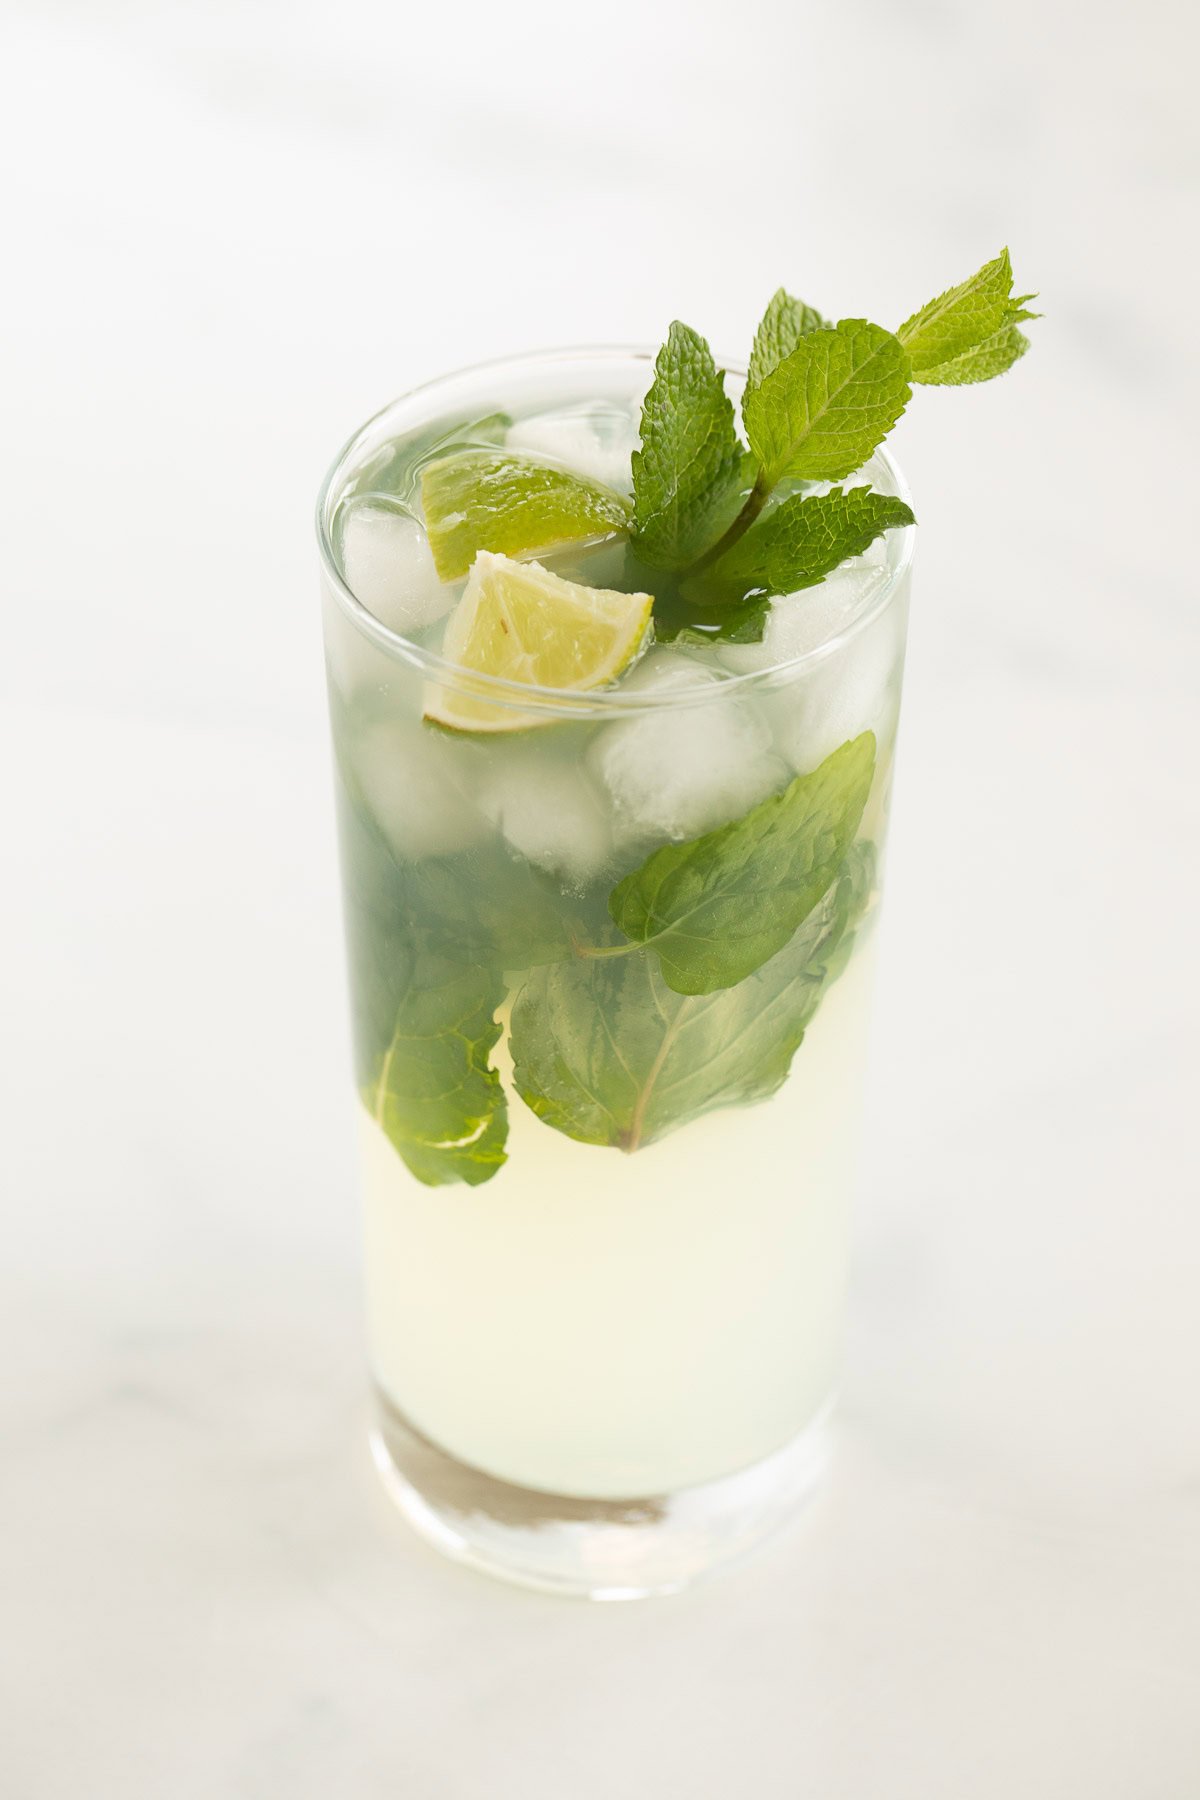 A glass of tequila mojito cocktail with lime wedges, ice cubes, and fresh mint leaves on a light background.